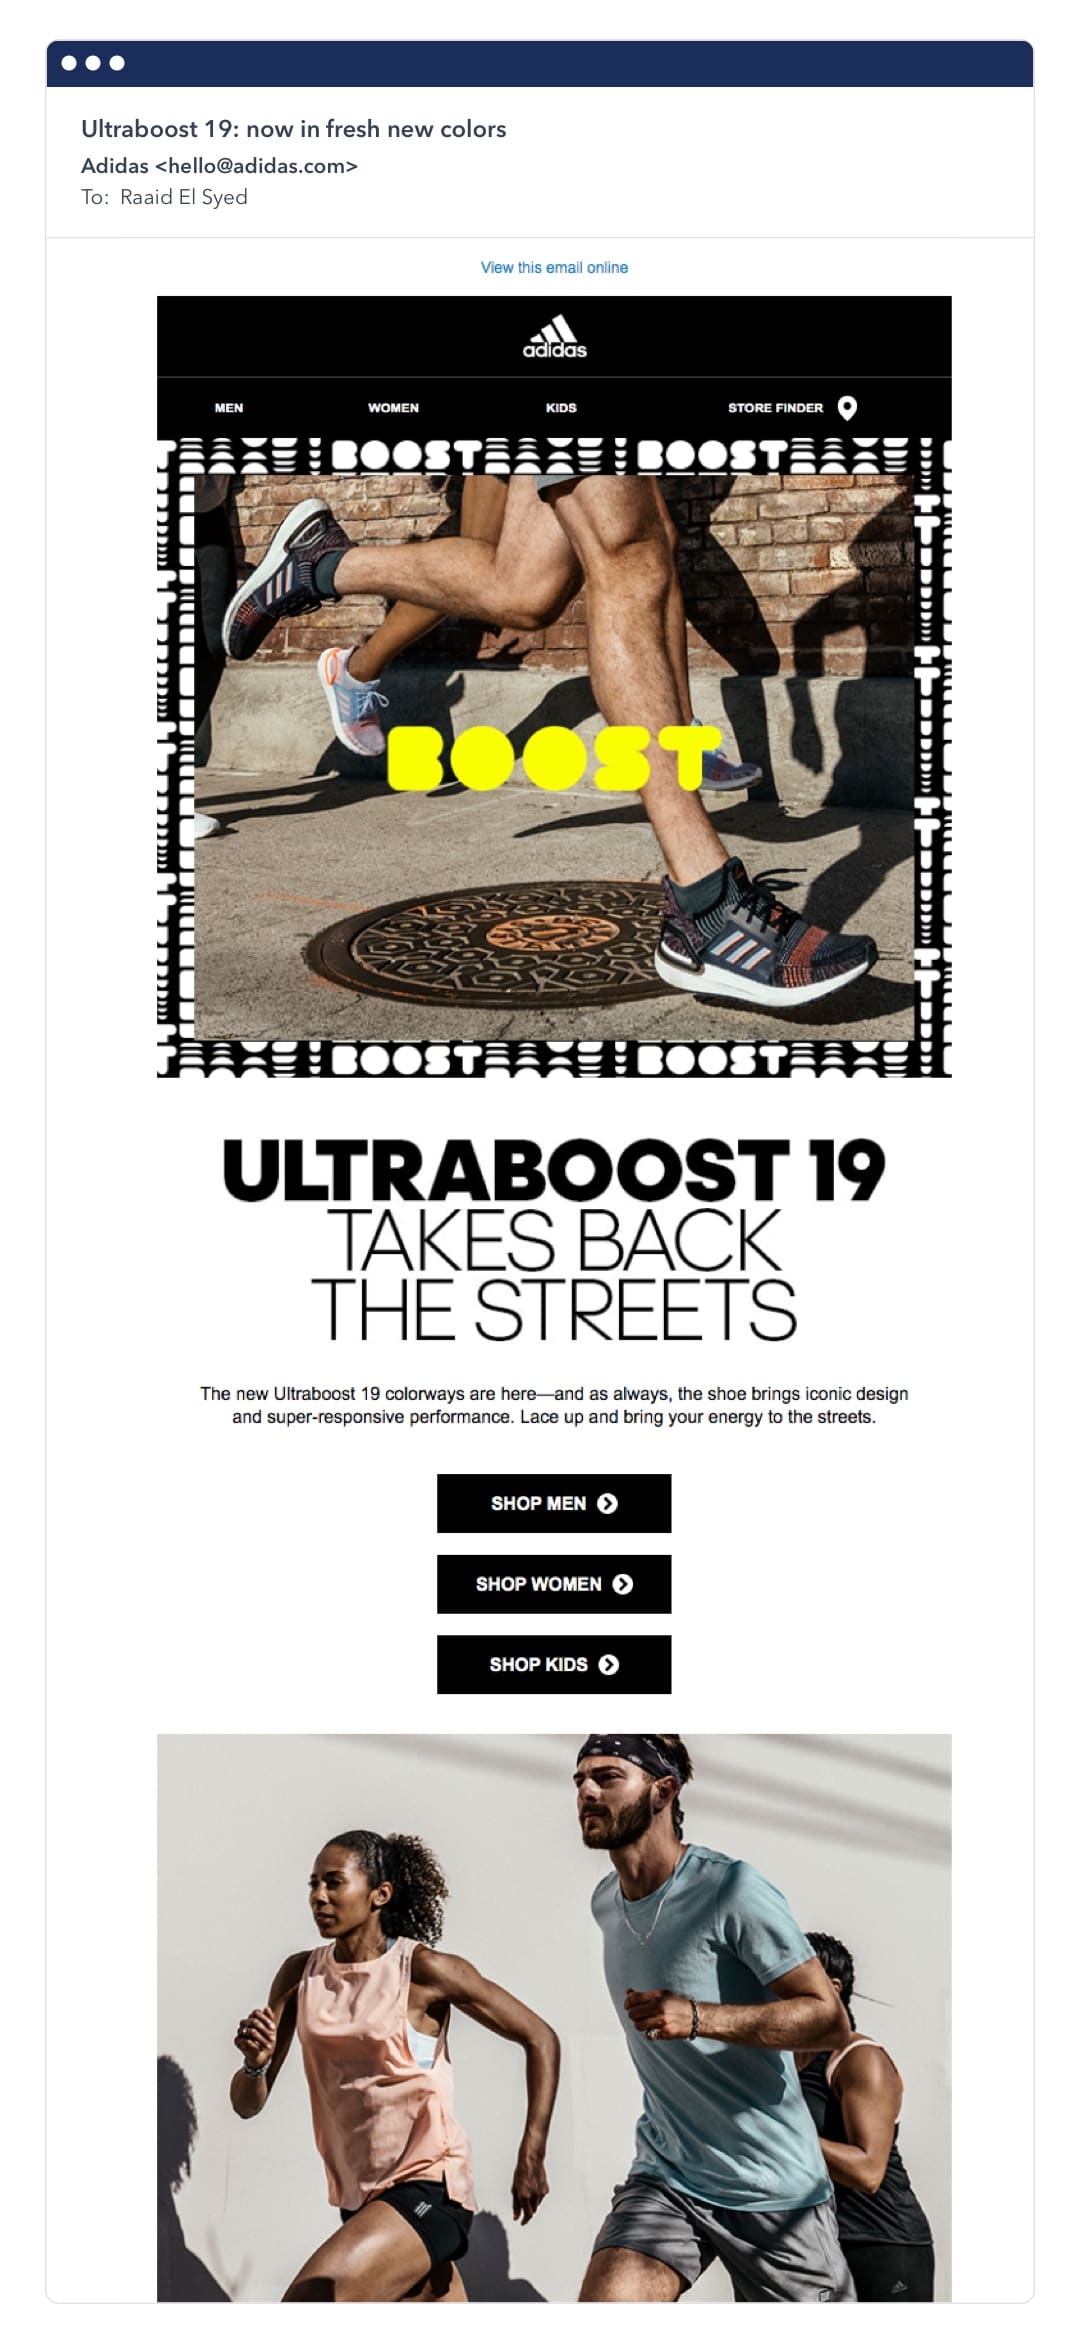 adidas html email template example